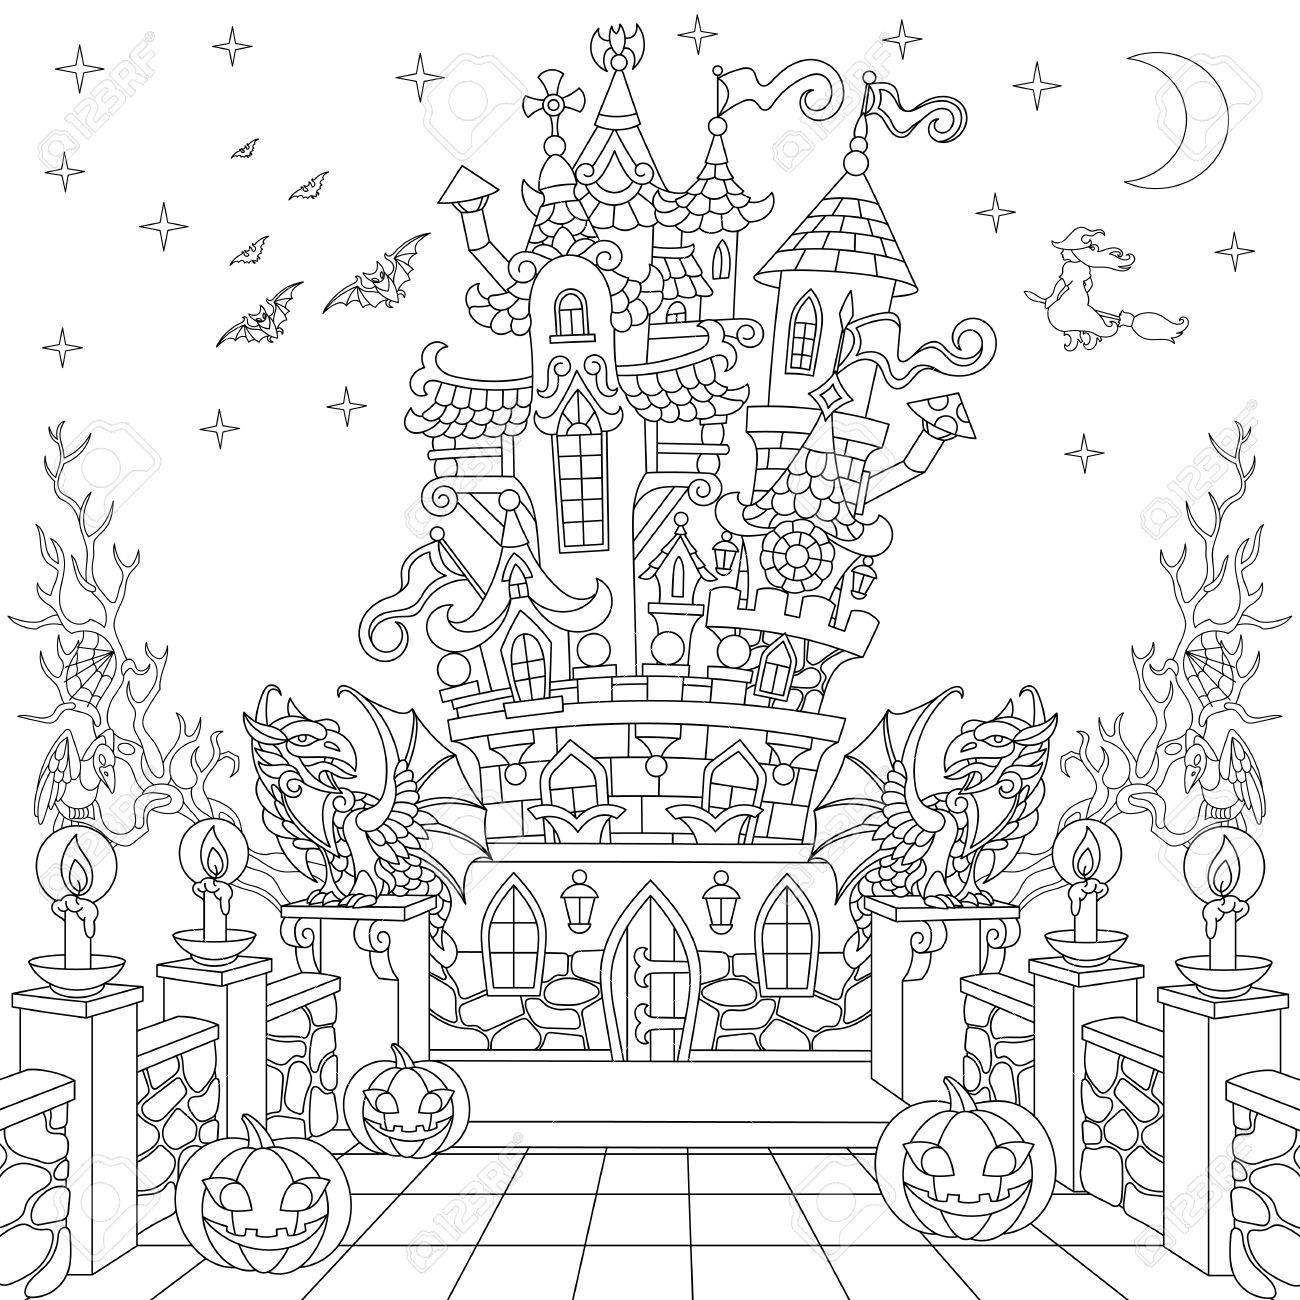 Goth Coloring Pages   Coloring Home